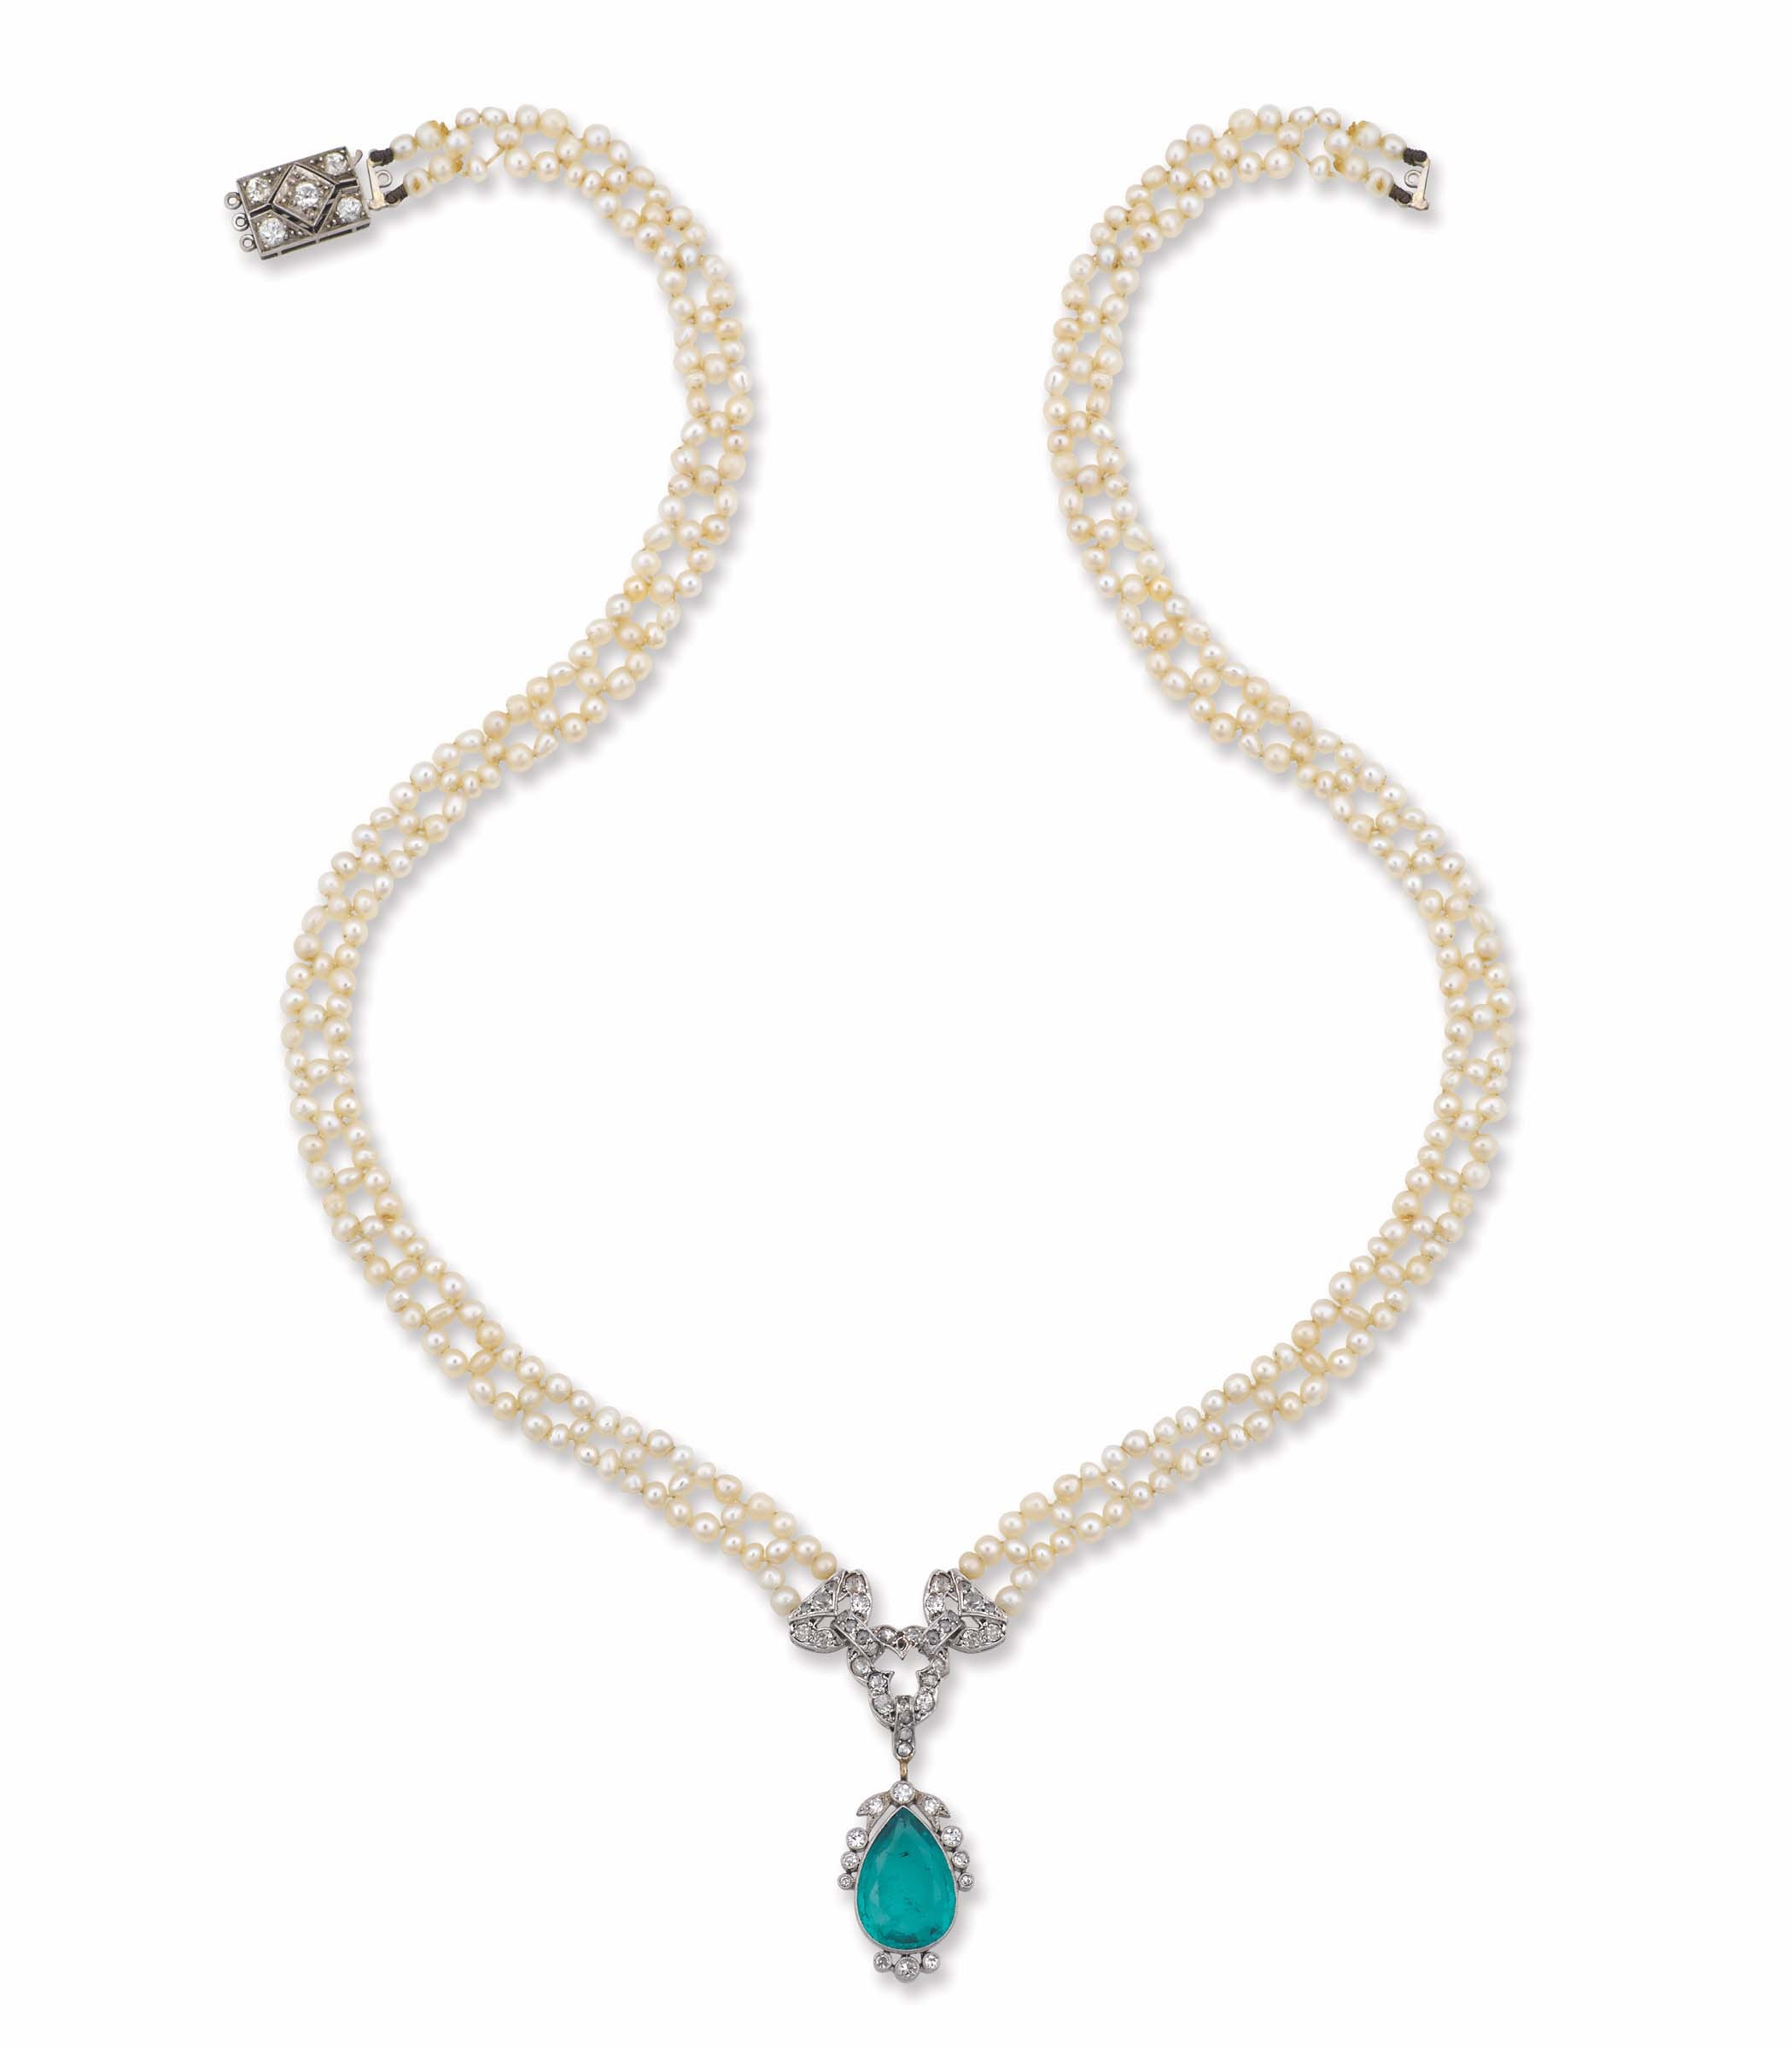 An Art Deco necklace with emerald and pearl montatura in oro ed argento